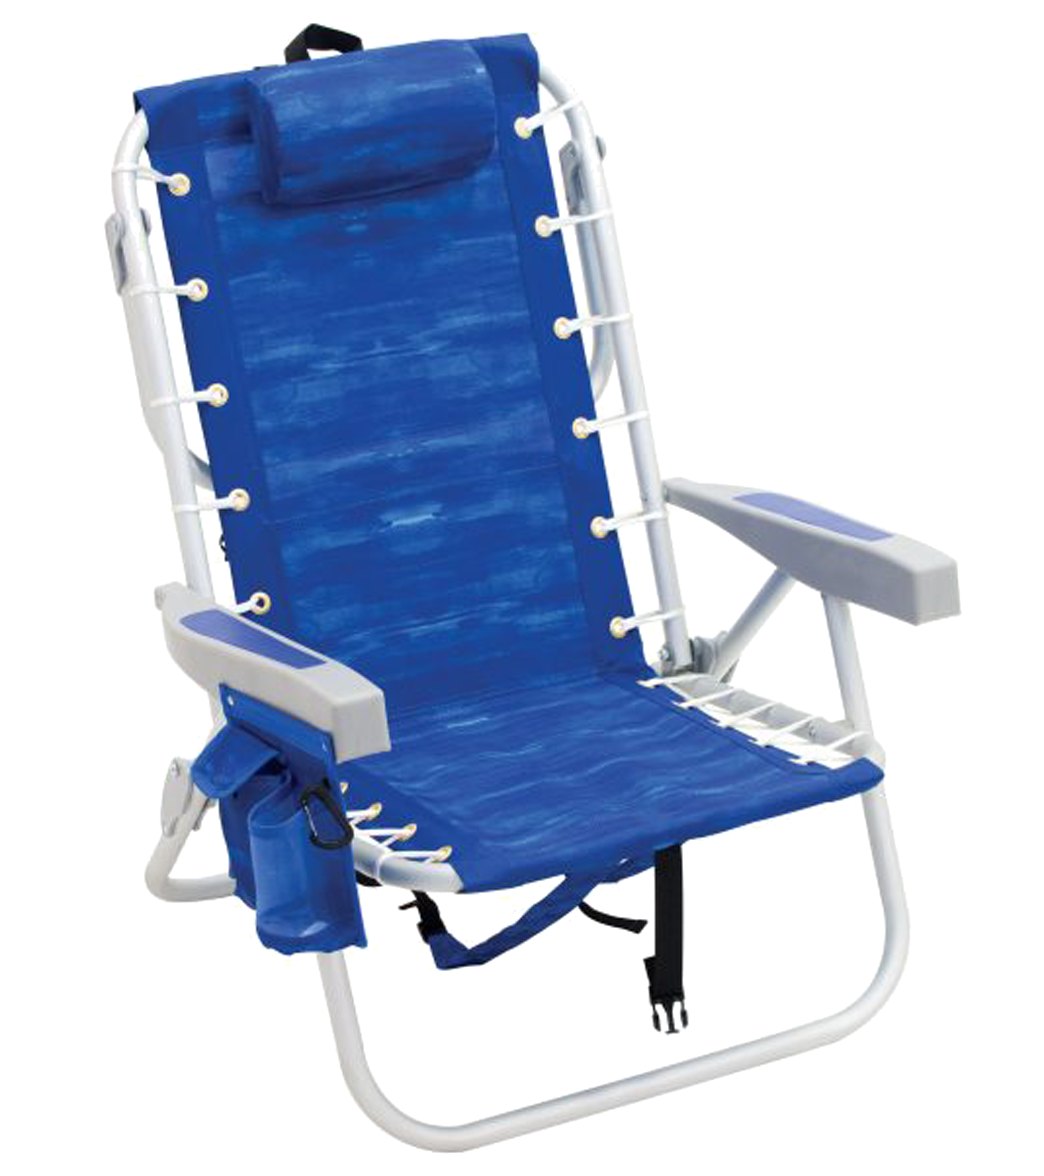 Simple Beach Chair With Cooler Bag for Simple Design